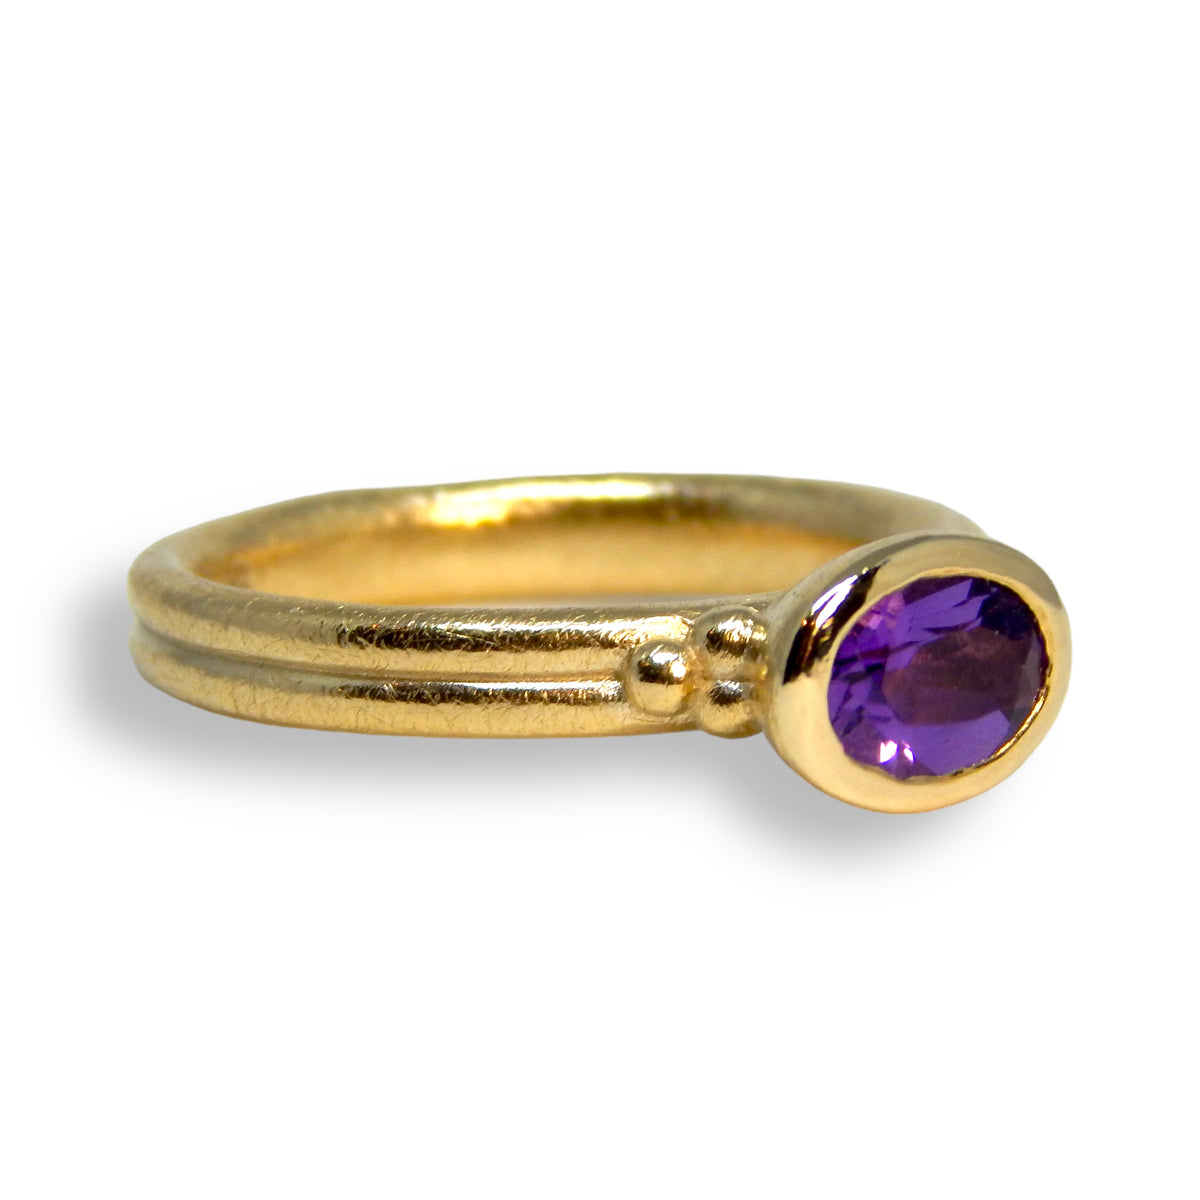 Rosie Wide Oval Shaped Stacker | Gold Stacking Ring | Choose Your Metal And Gemstone